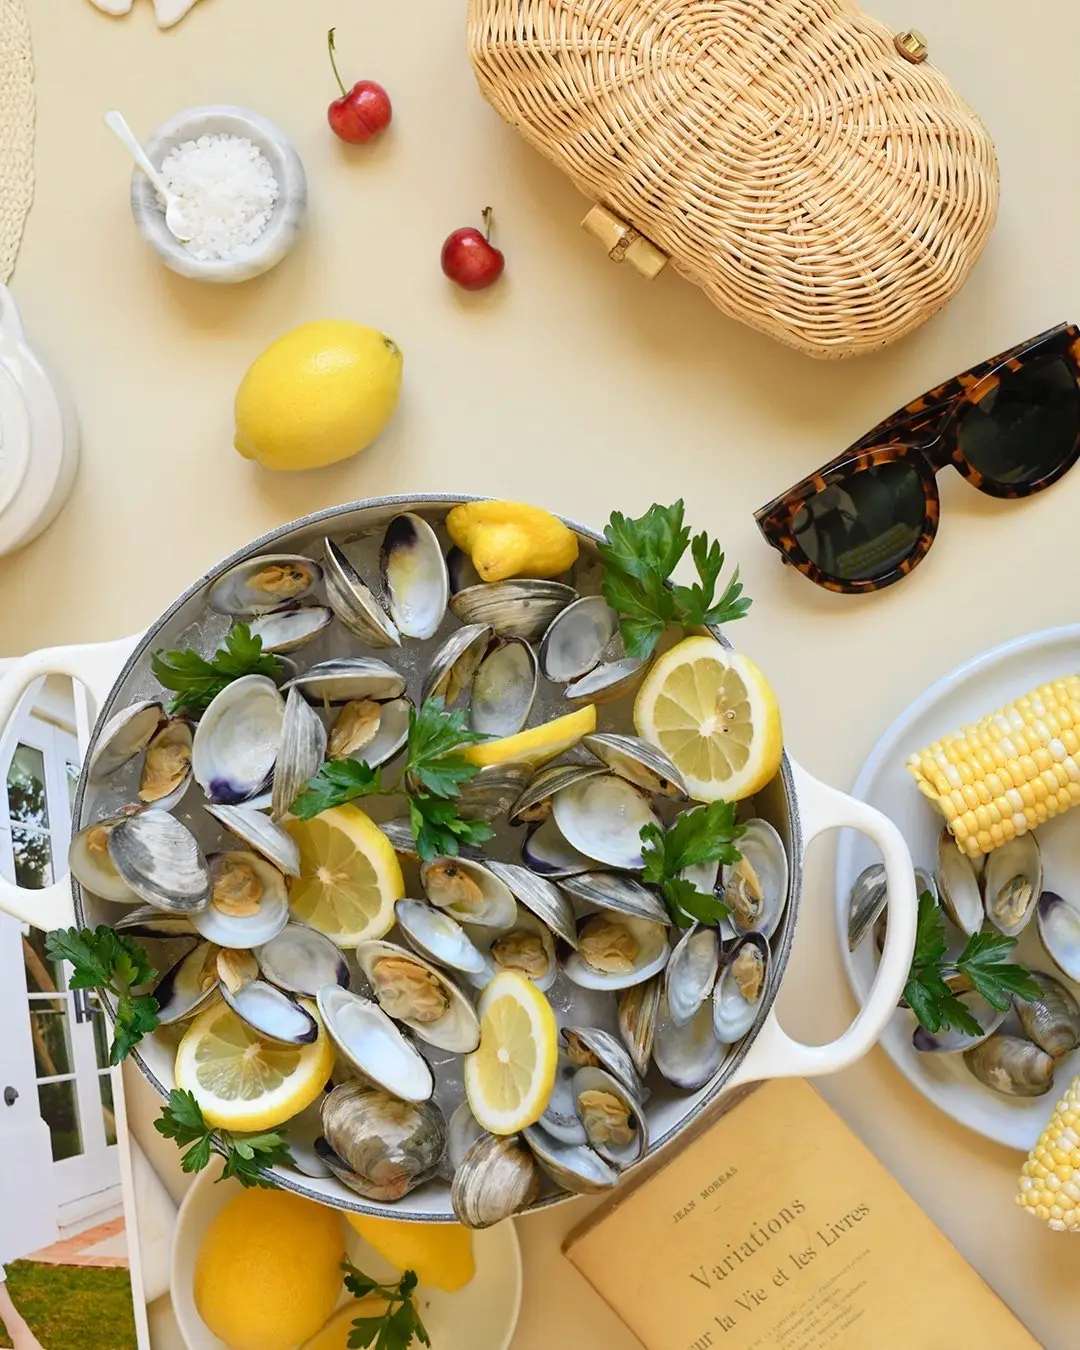 Perfect Summer Seafood Recipes ﻿ ﻿﻿for Girls Who Love the Bounty of the Ocean ...